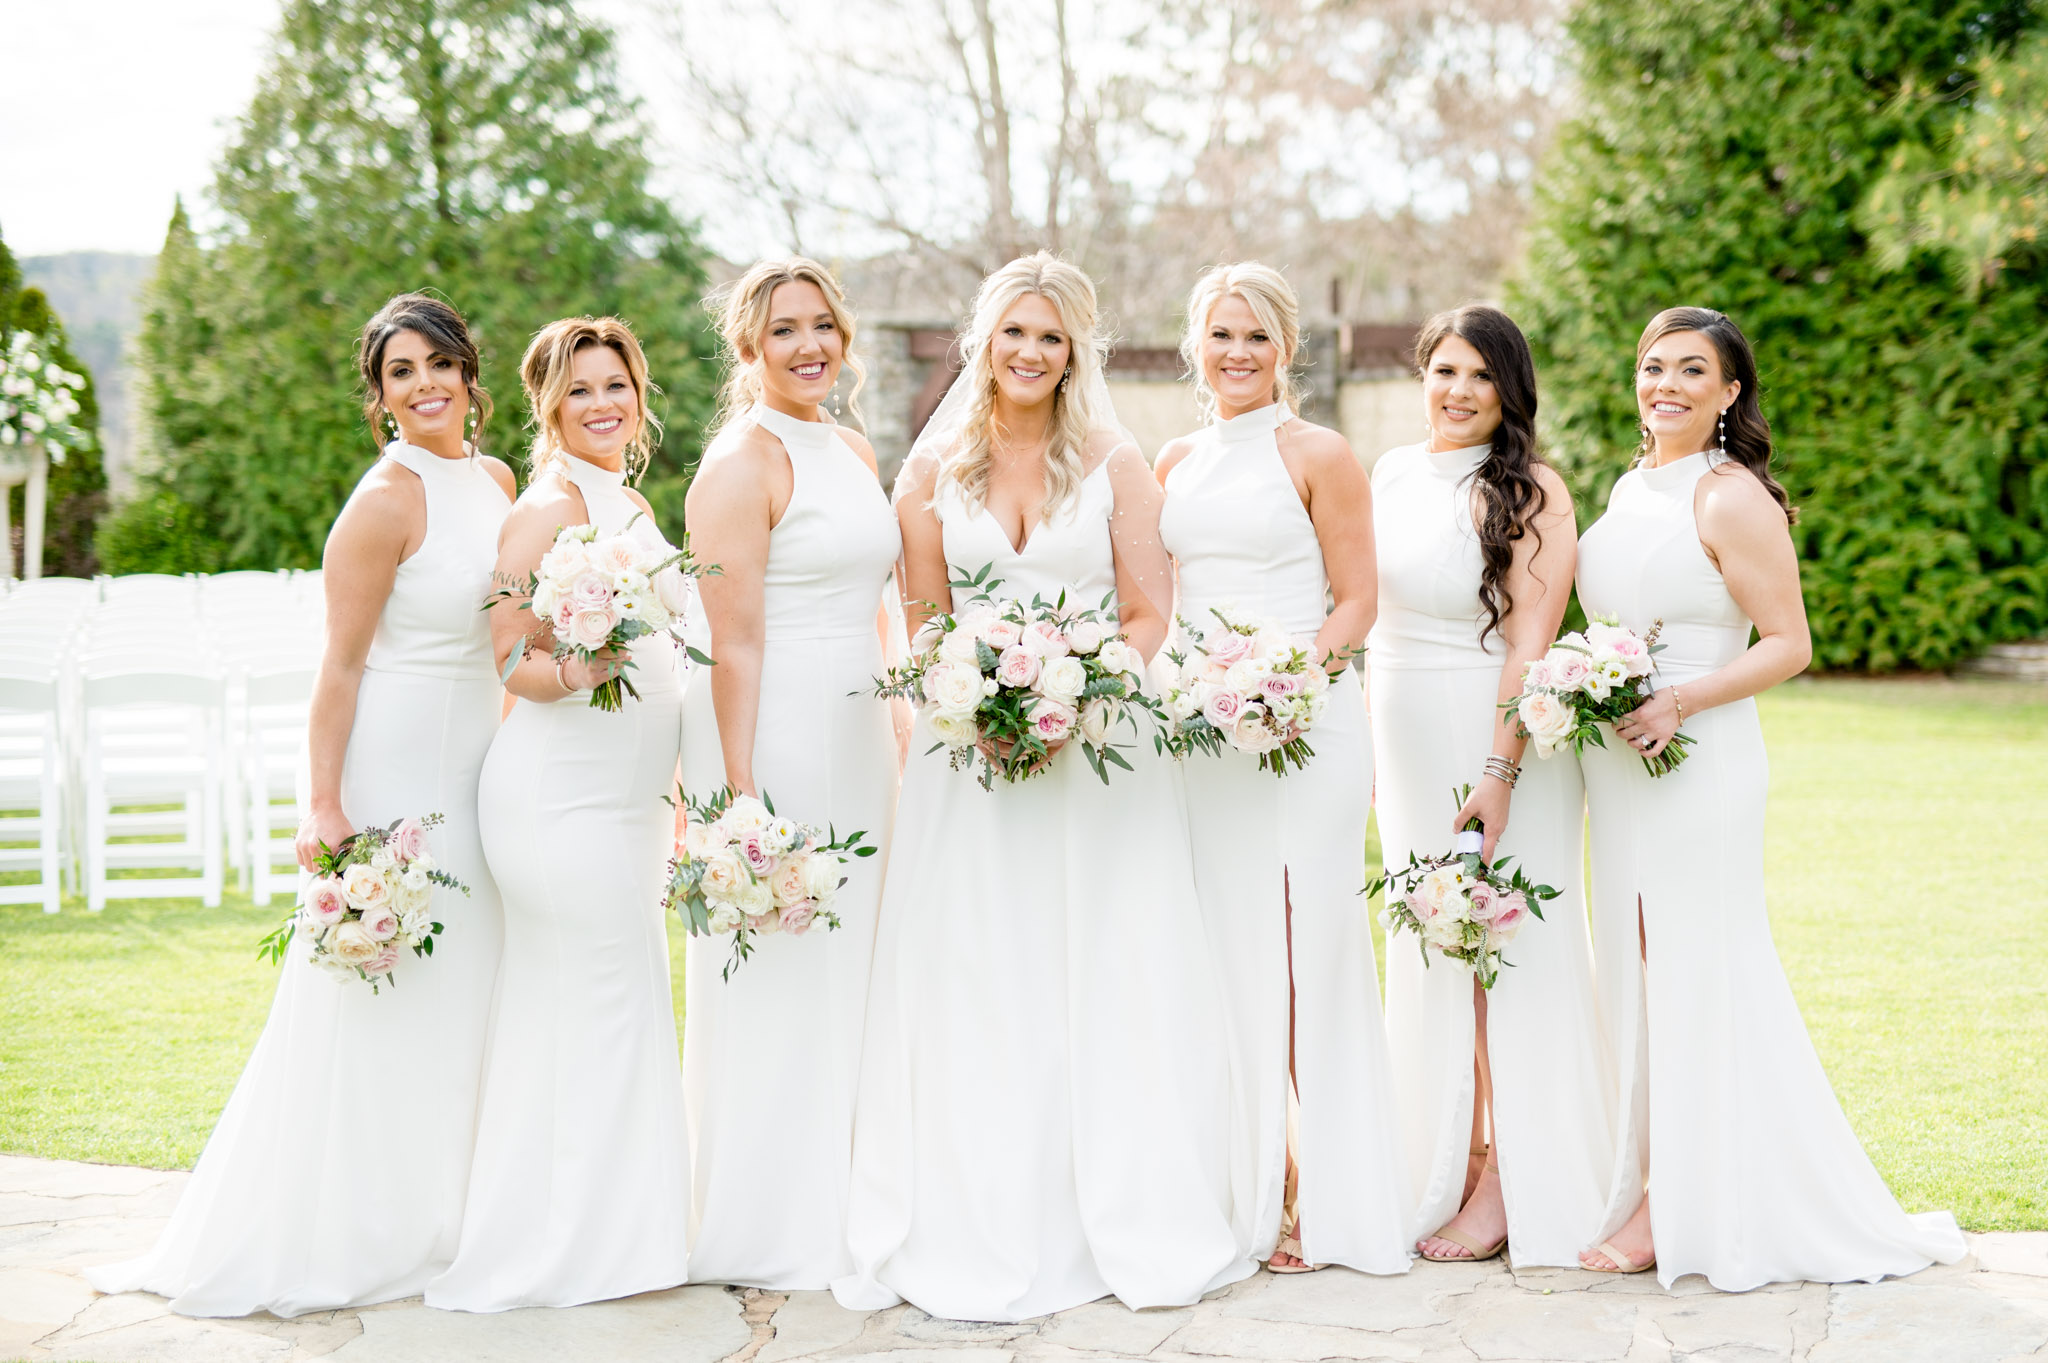 Bride and bridesmaids hold bouquets and smile.